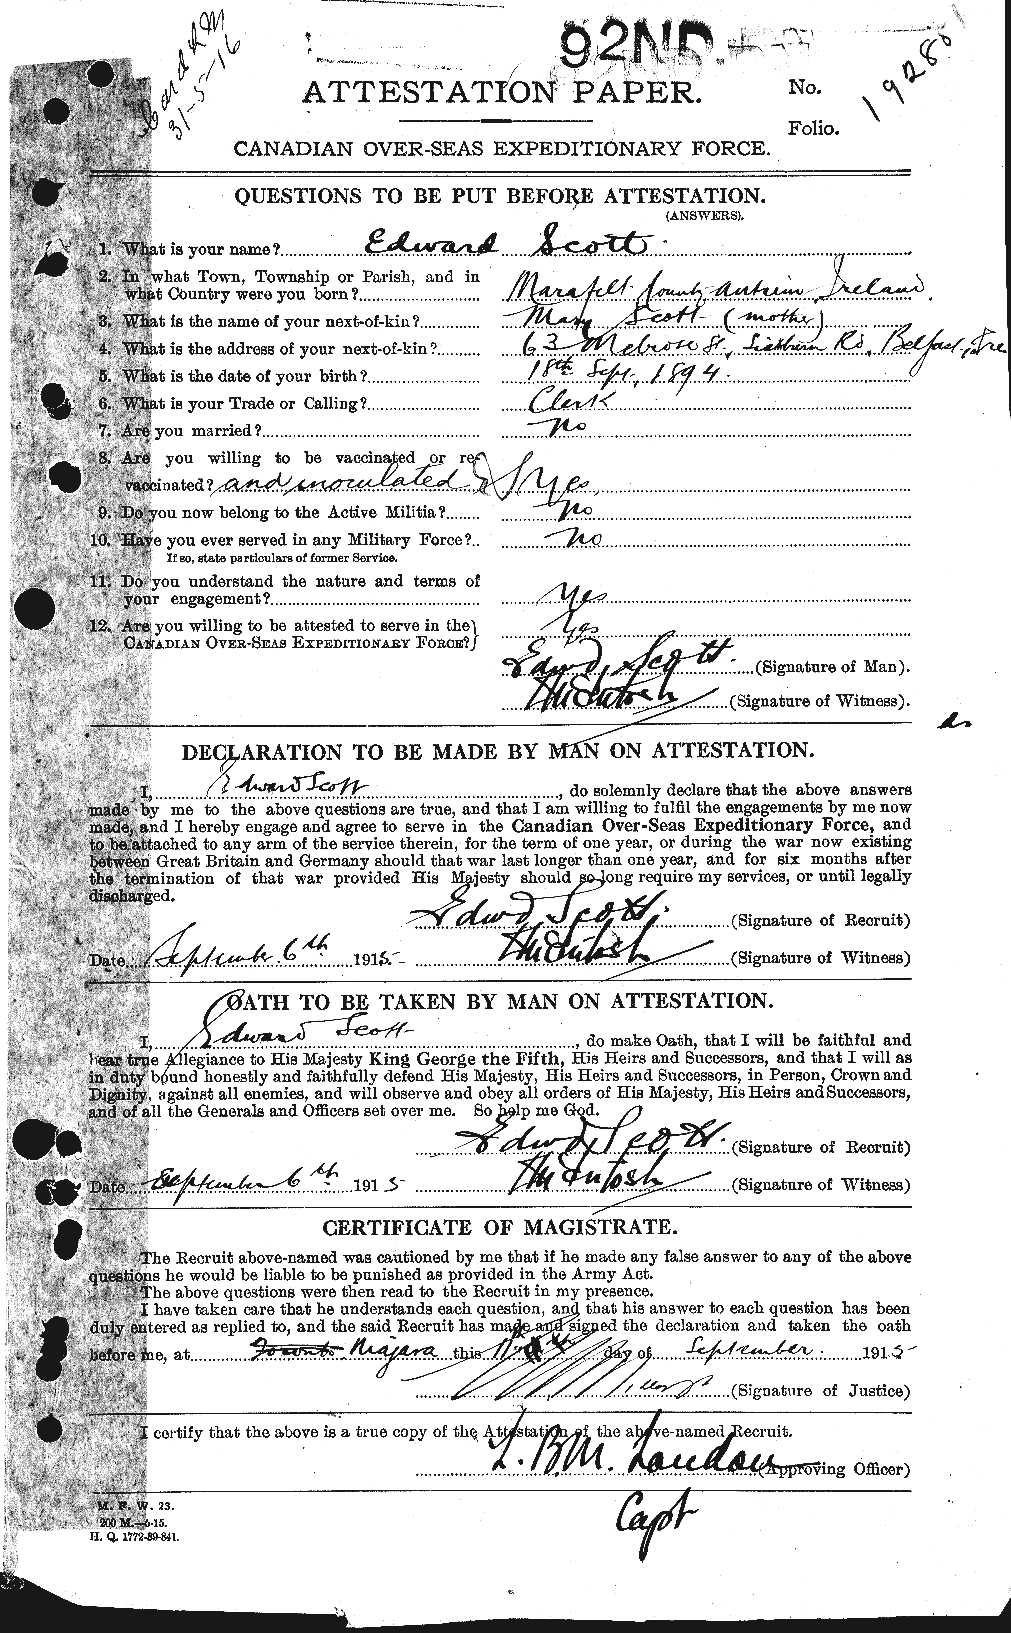 Personnel Records of the First World War - CEF 085323a